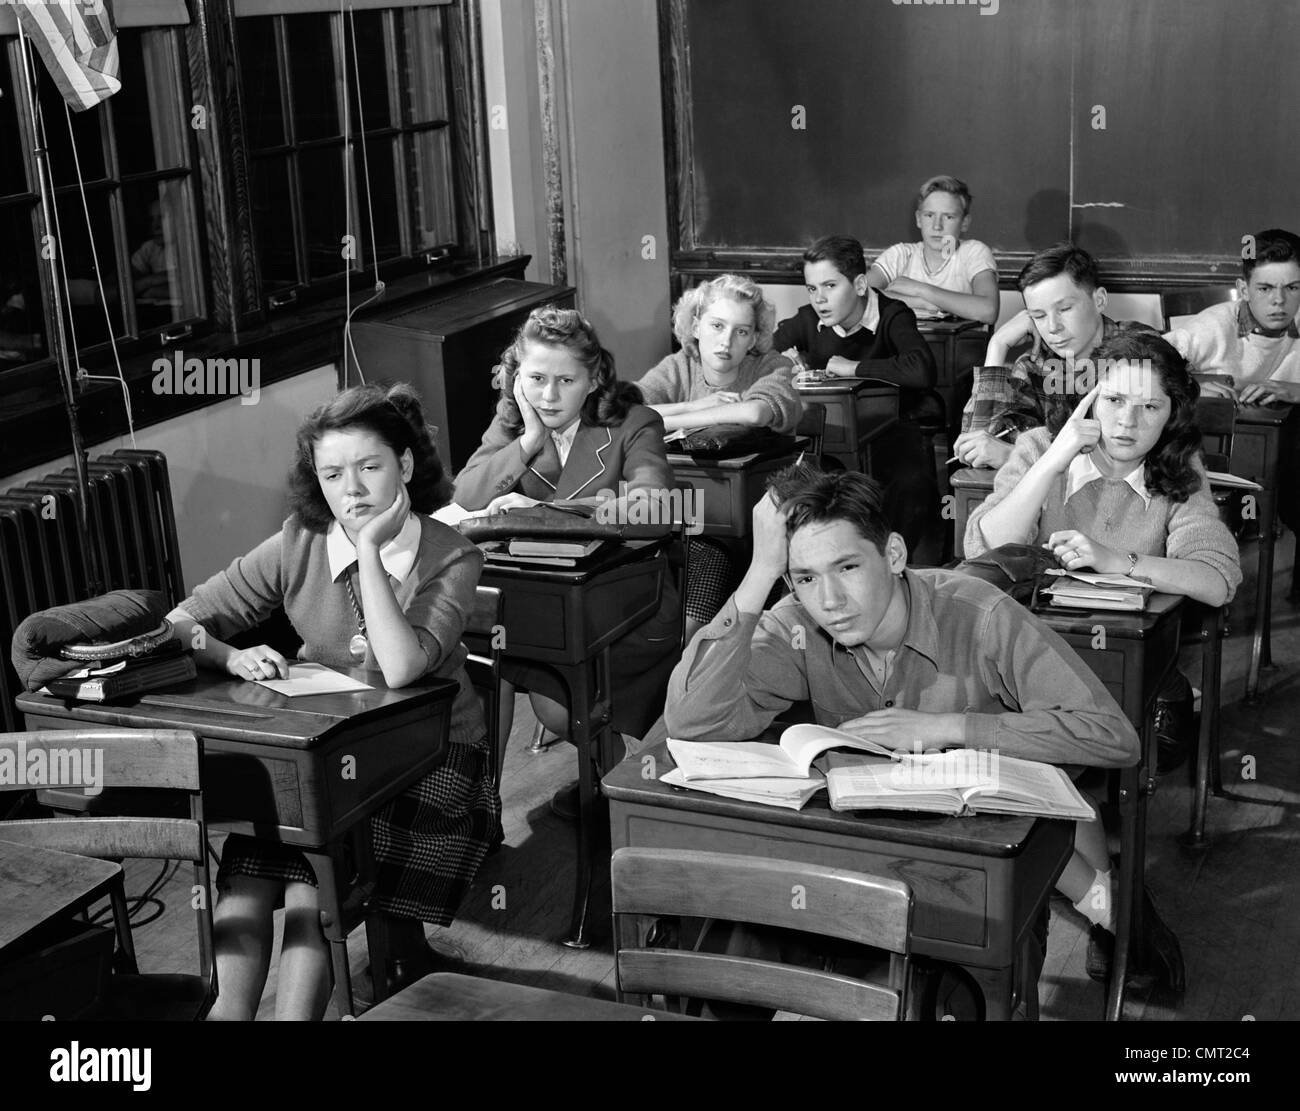 1940s 1950s HIGH SCHOOL CLASSROOM OF BORED STUDENTS SITTING AT DESKS Stock Photo